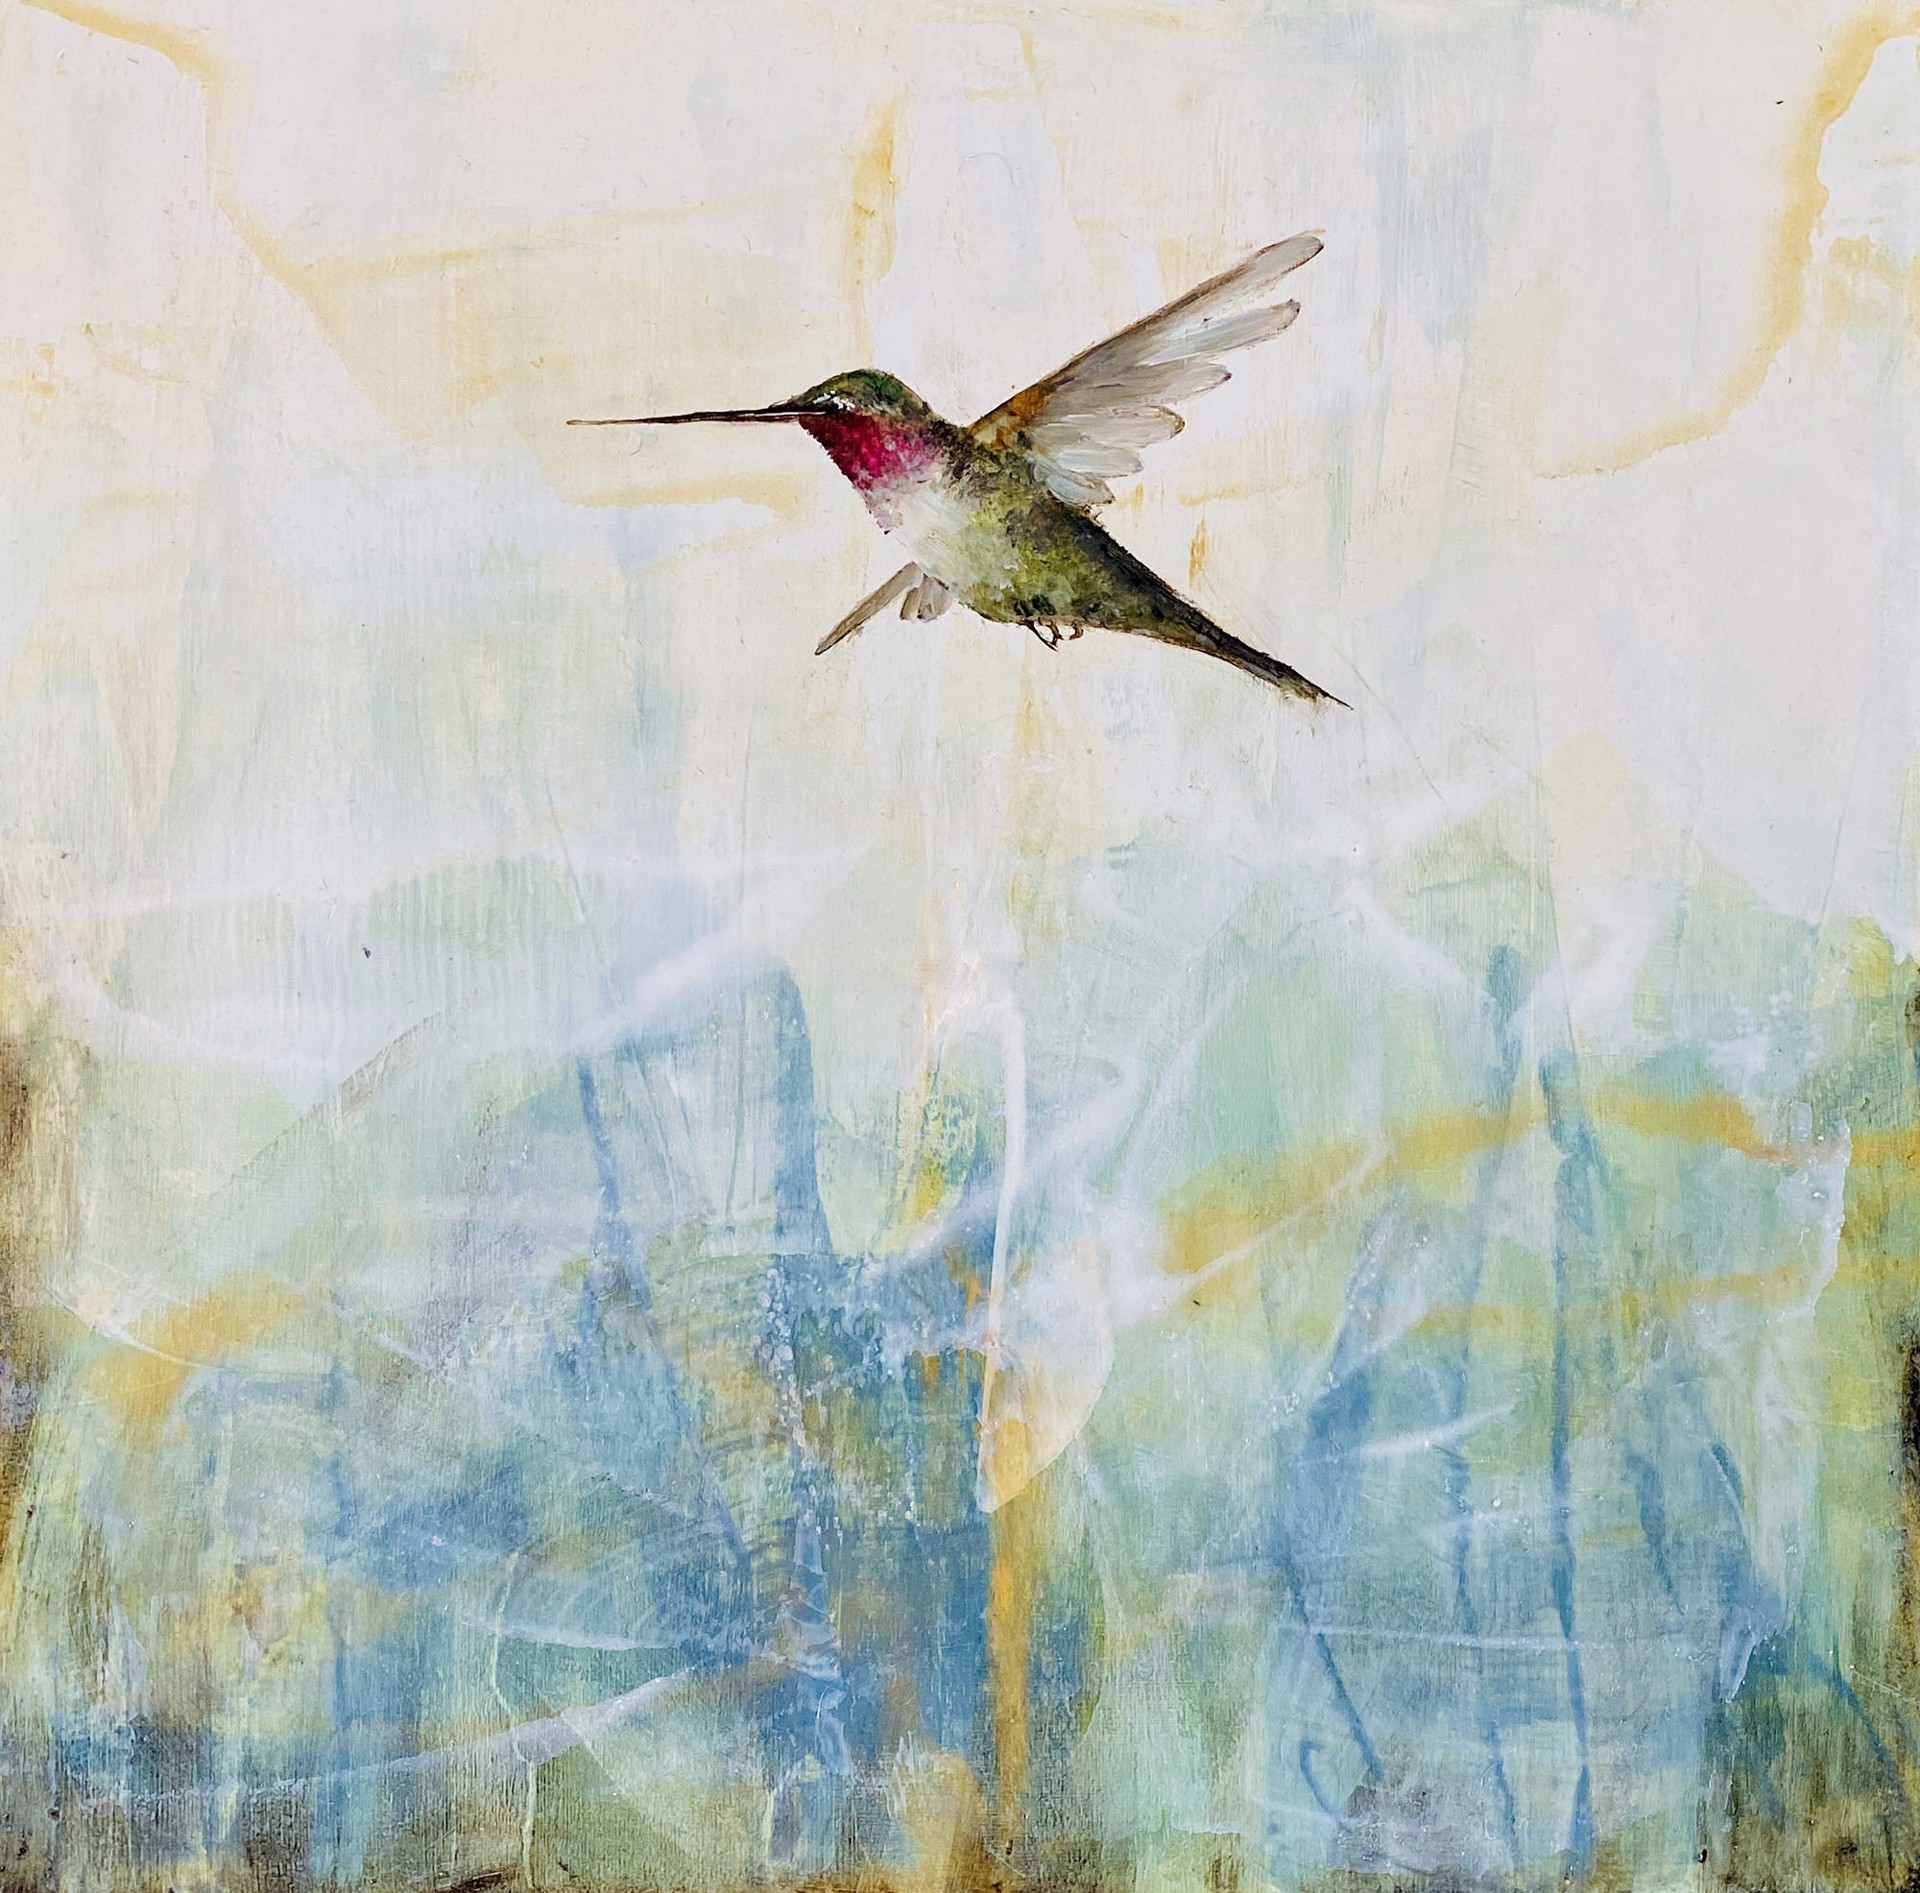 Original Oil Painting Featuring A Red Throated Hummingbird Over Abstract Blue And Green Background